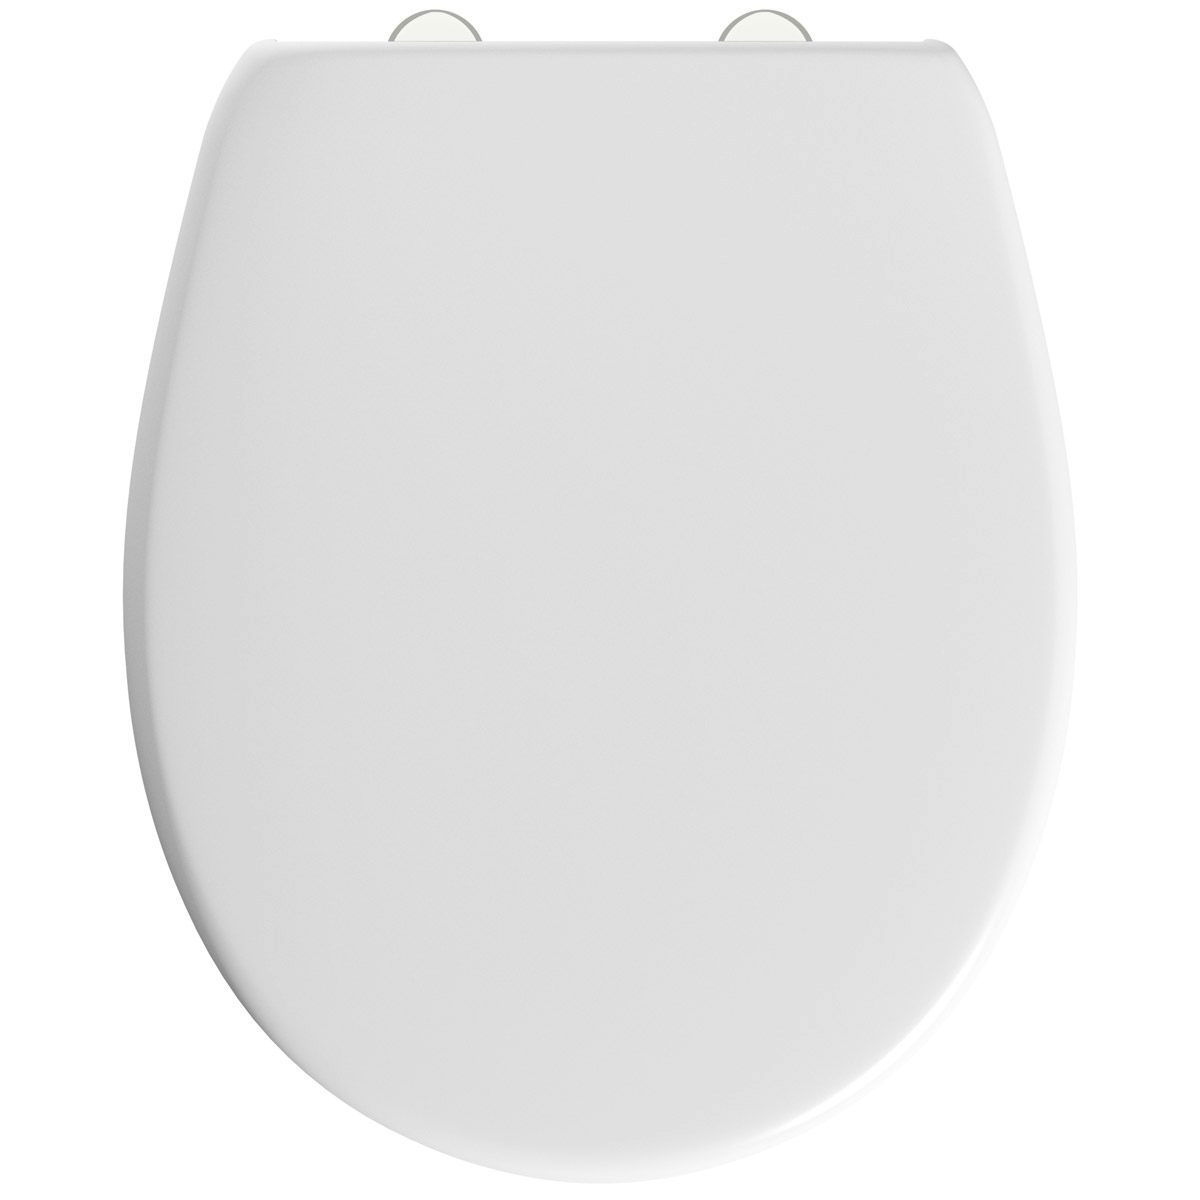 Toilet seat covers for Catalan Snow Old Thermoset Normal-Soft Close Vane 